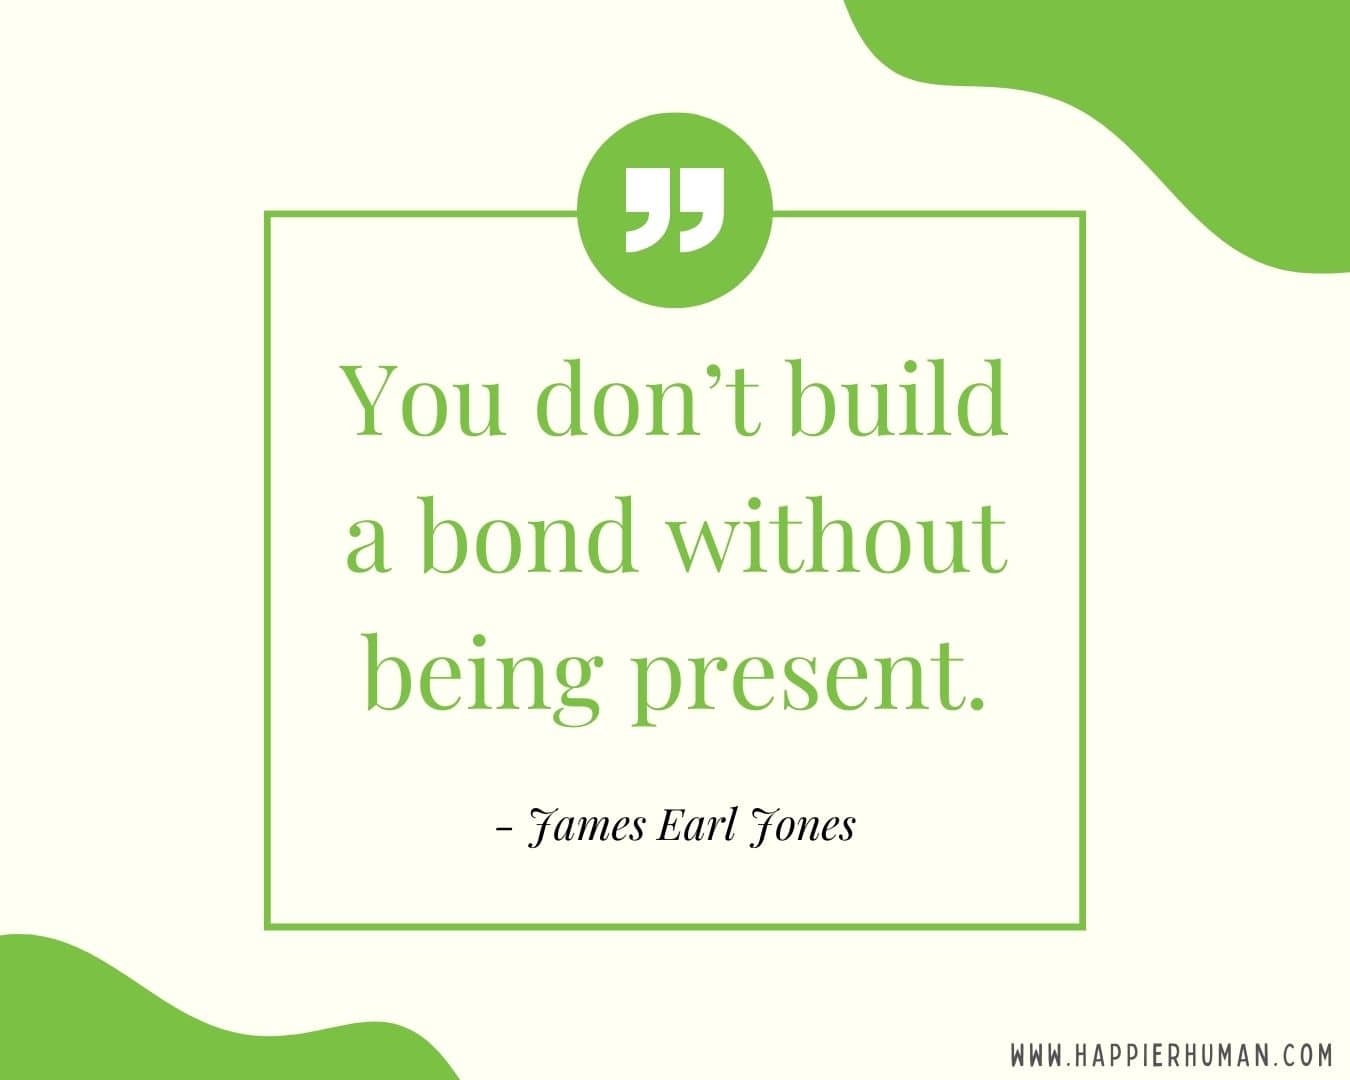 I’m Here for You Quotes - “You don’t build a bond without being present.” – James Earl Jones